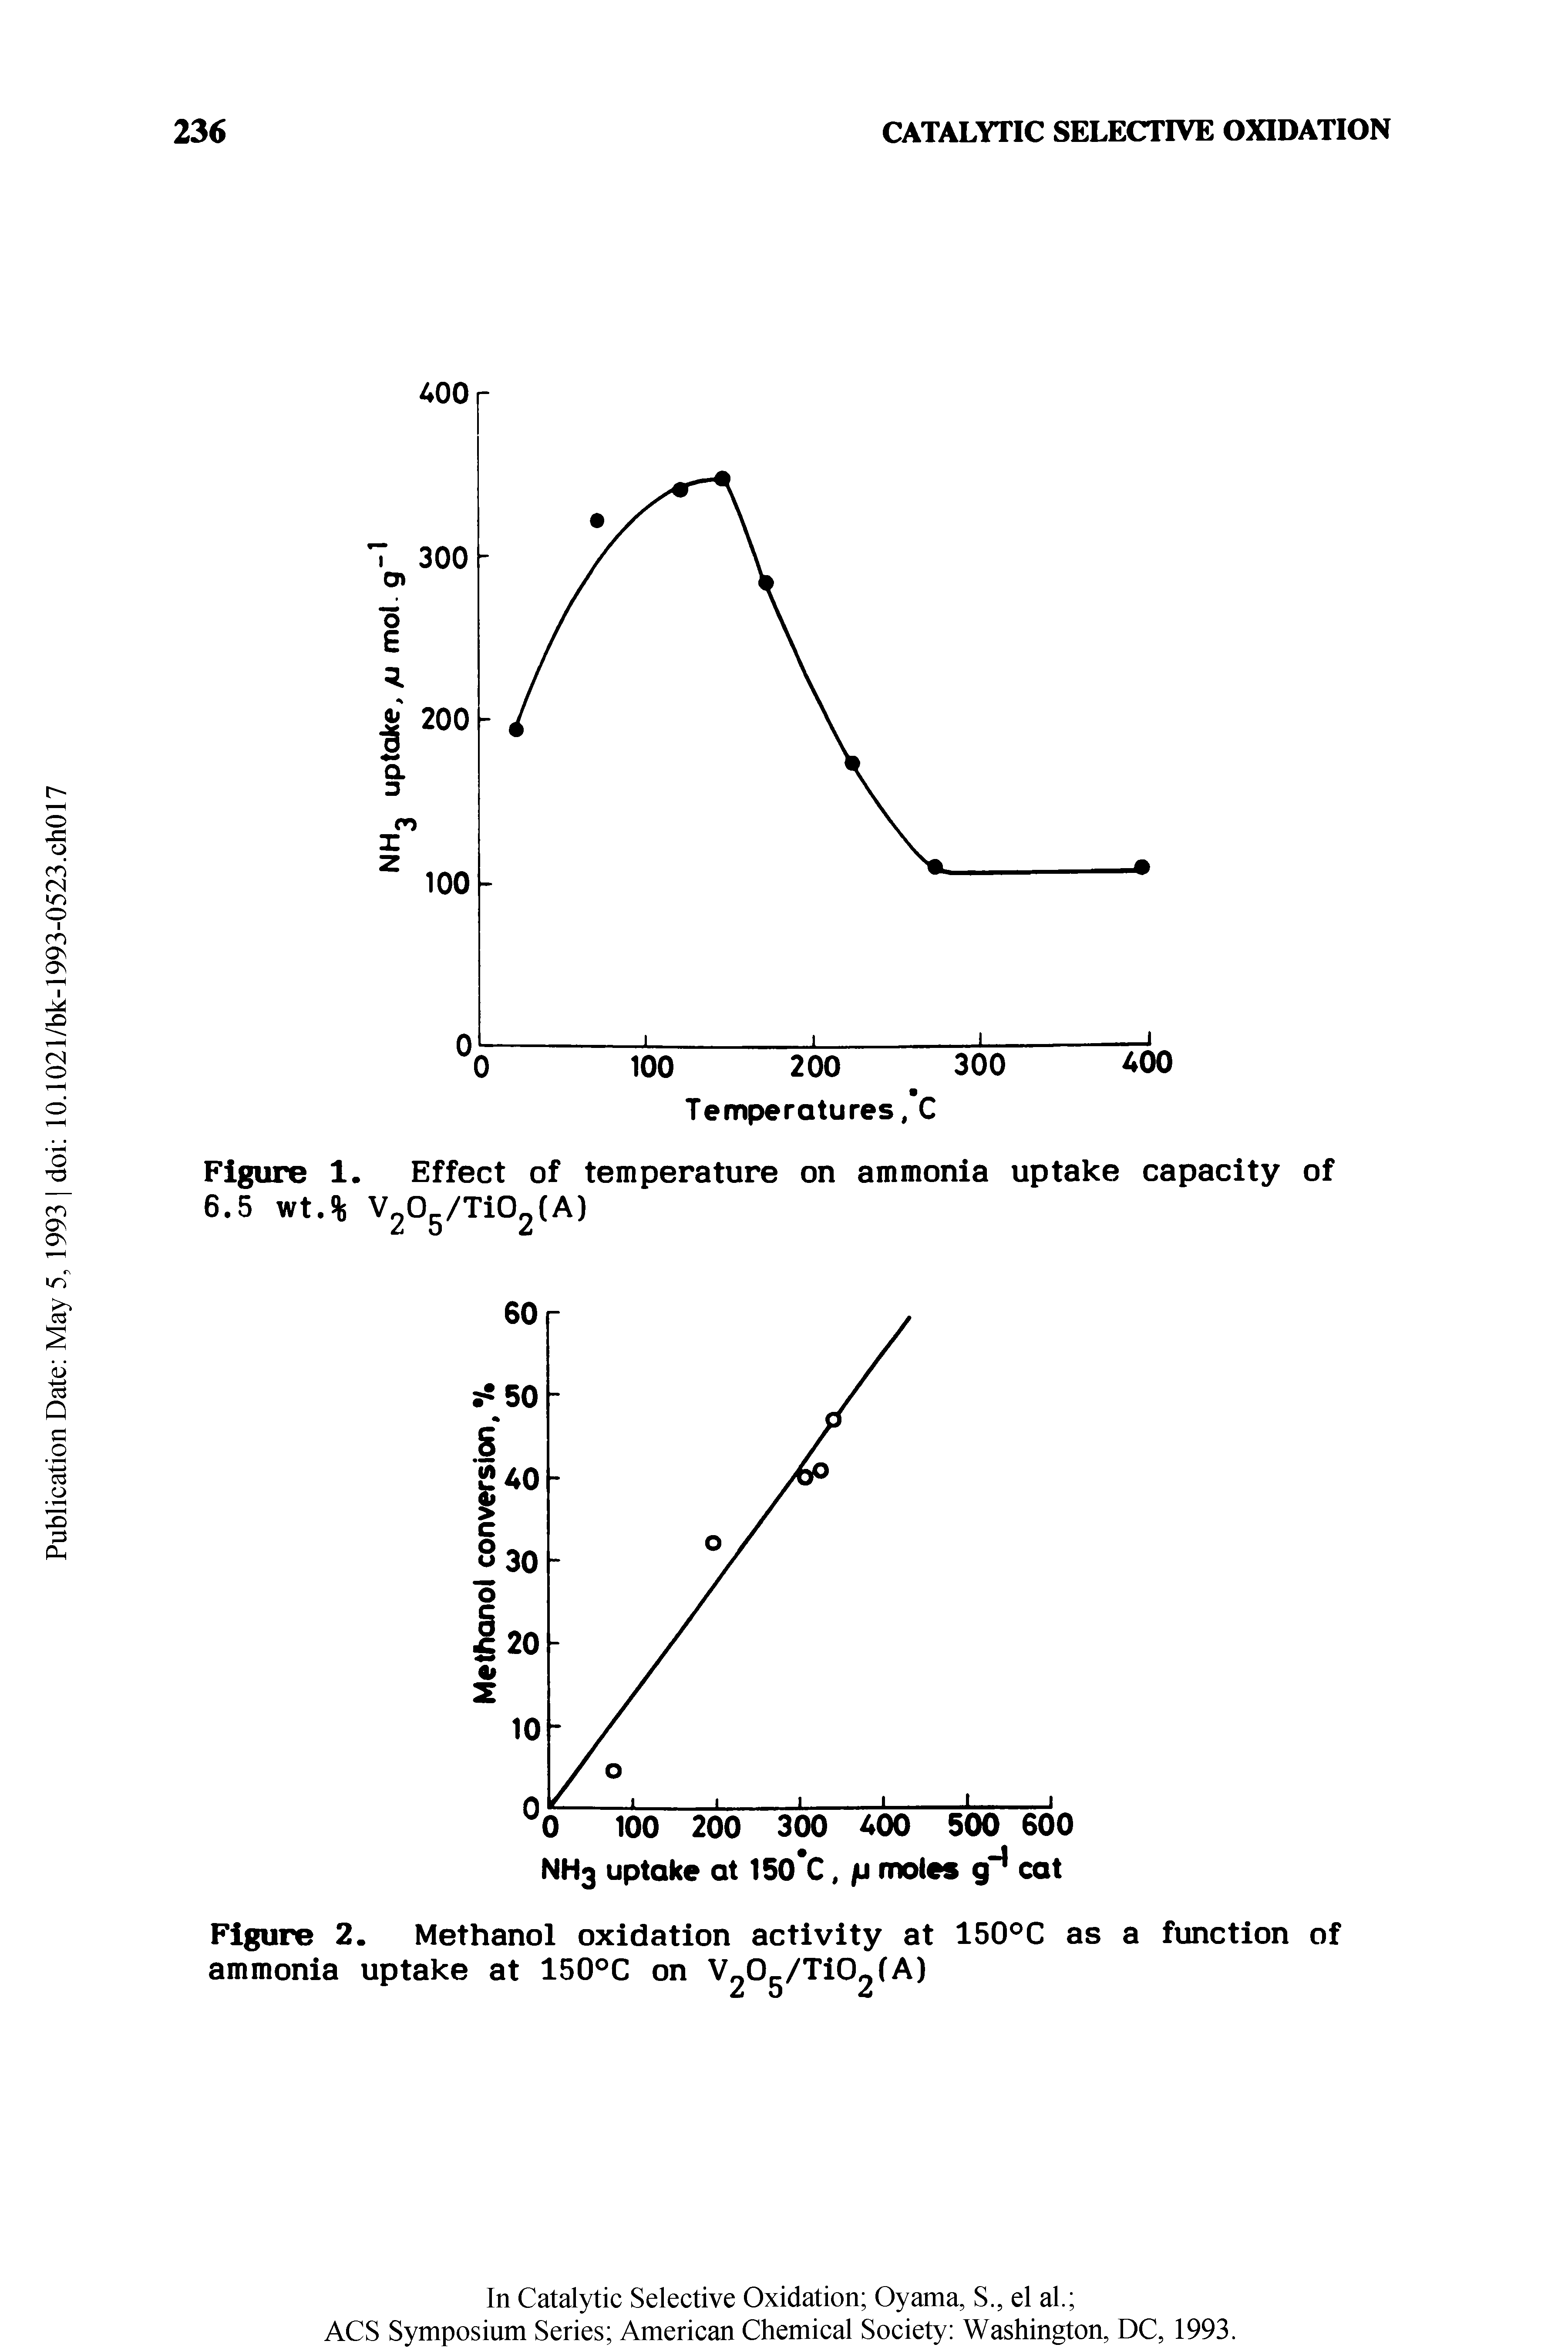 Figure 1. Effect of temperature on ammonia uptake capacity of 6.5 wt.% V20g/Ti02(A)...